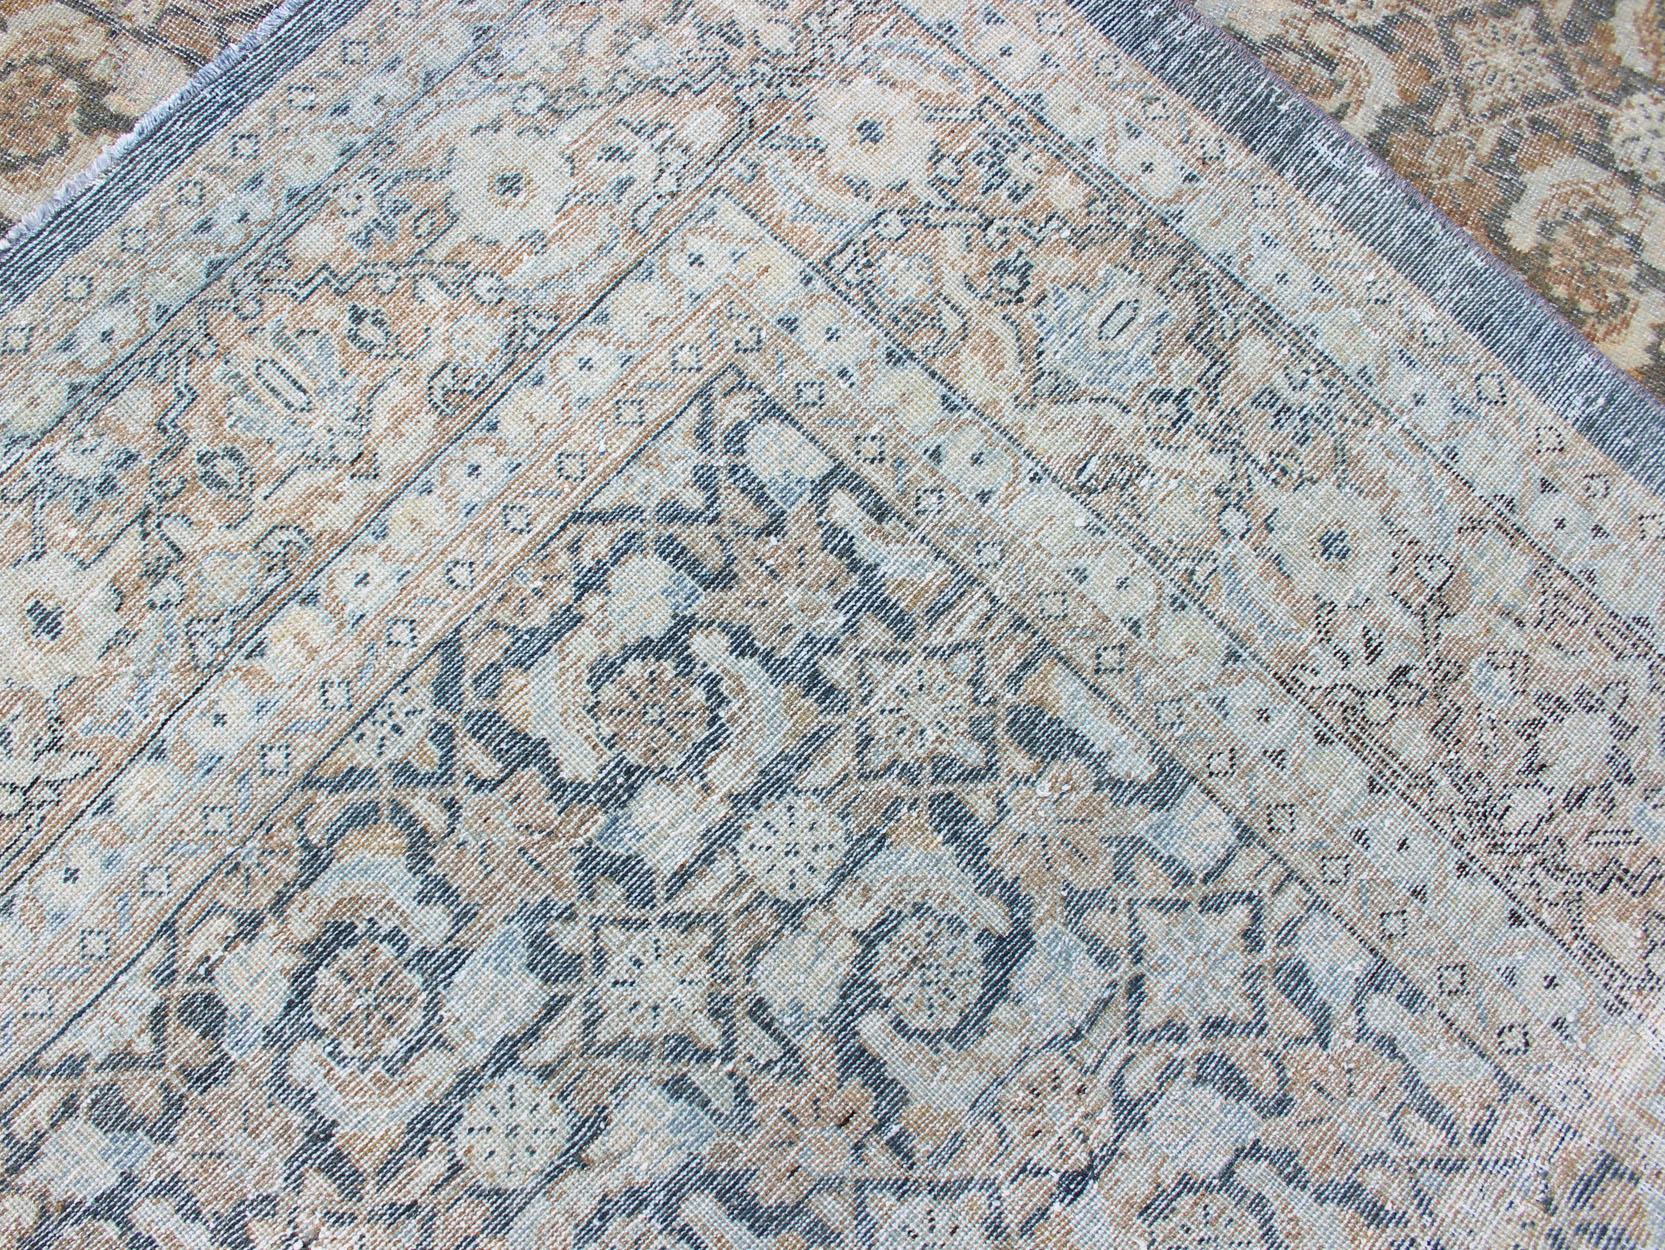 Antique Persian Sultanabad Distressed Rug in Blue, Blue Gray and Light Brown 13